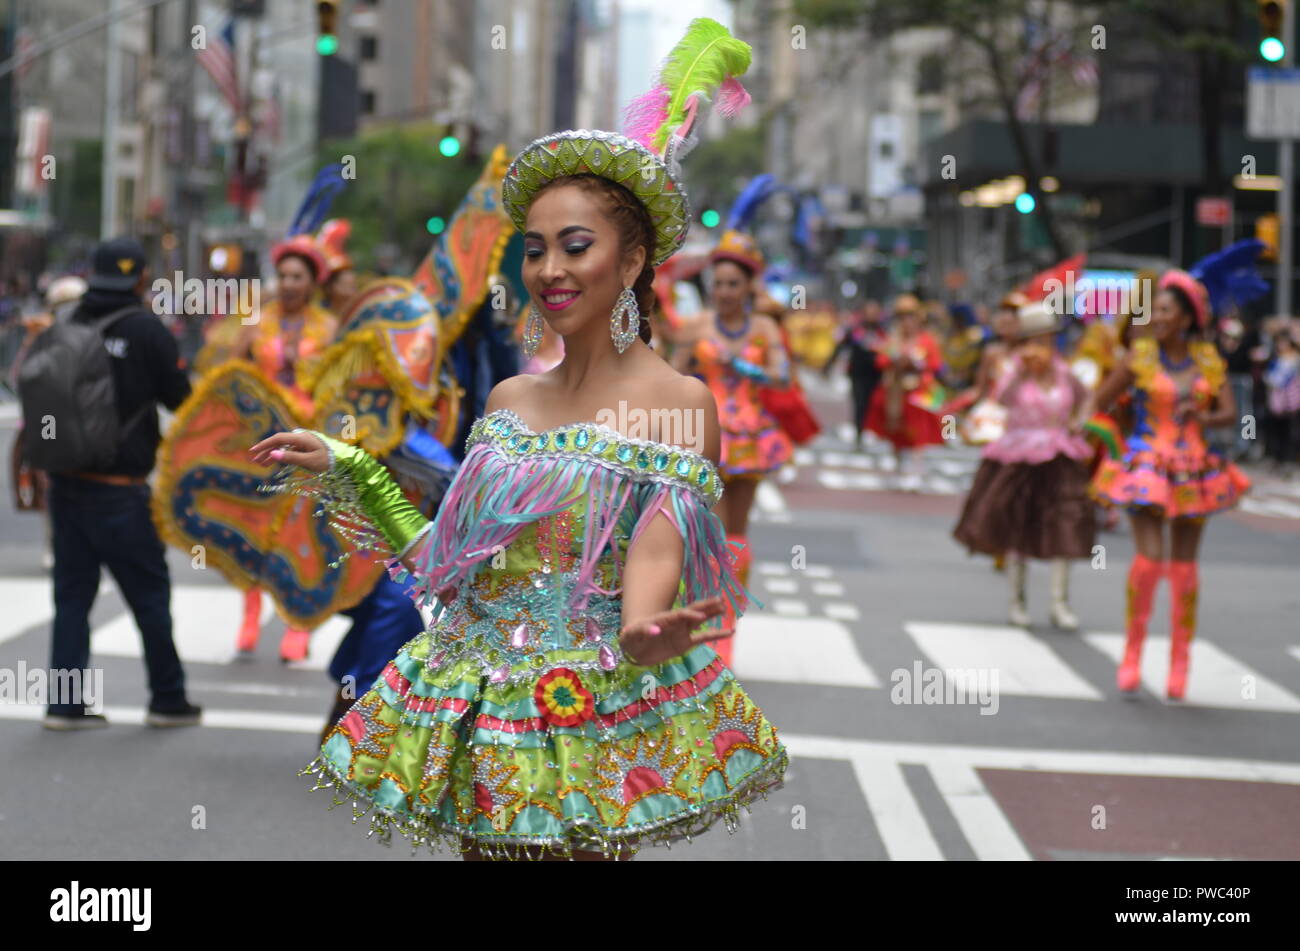 The 54th Hispanic Day Parade marches up Fifth Avenue. Thousands of